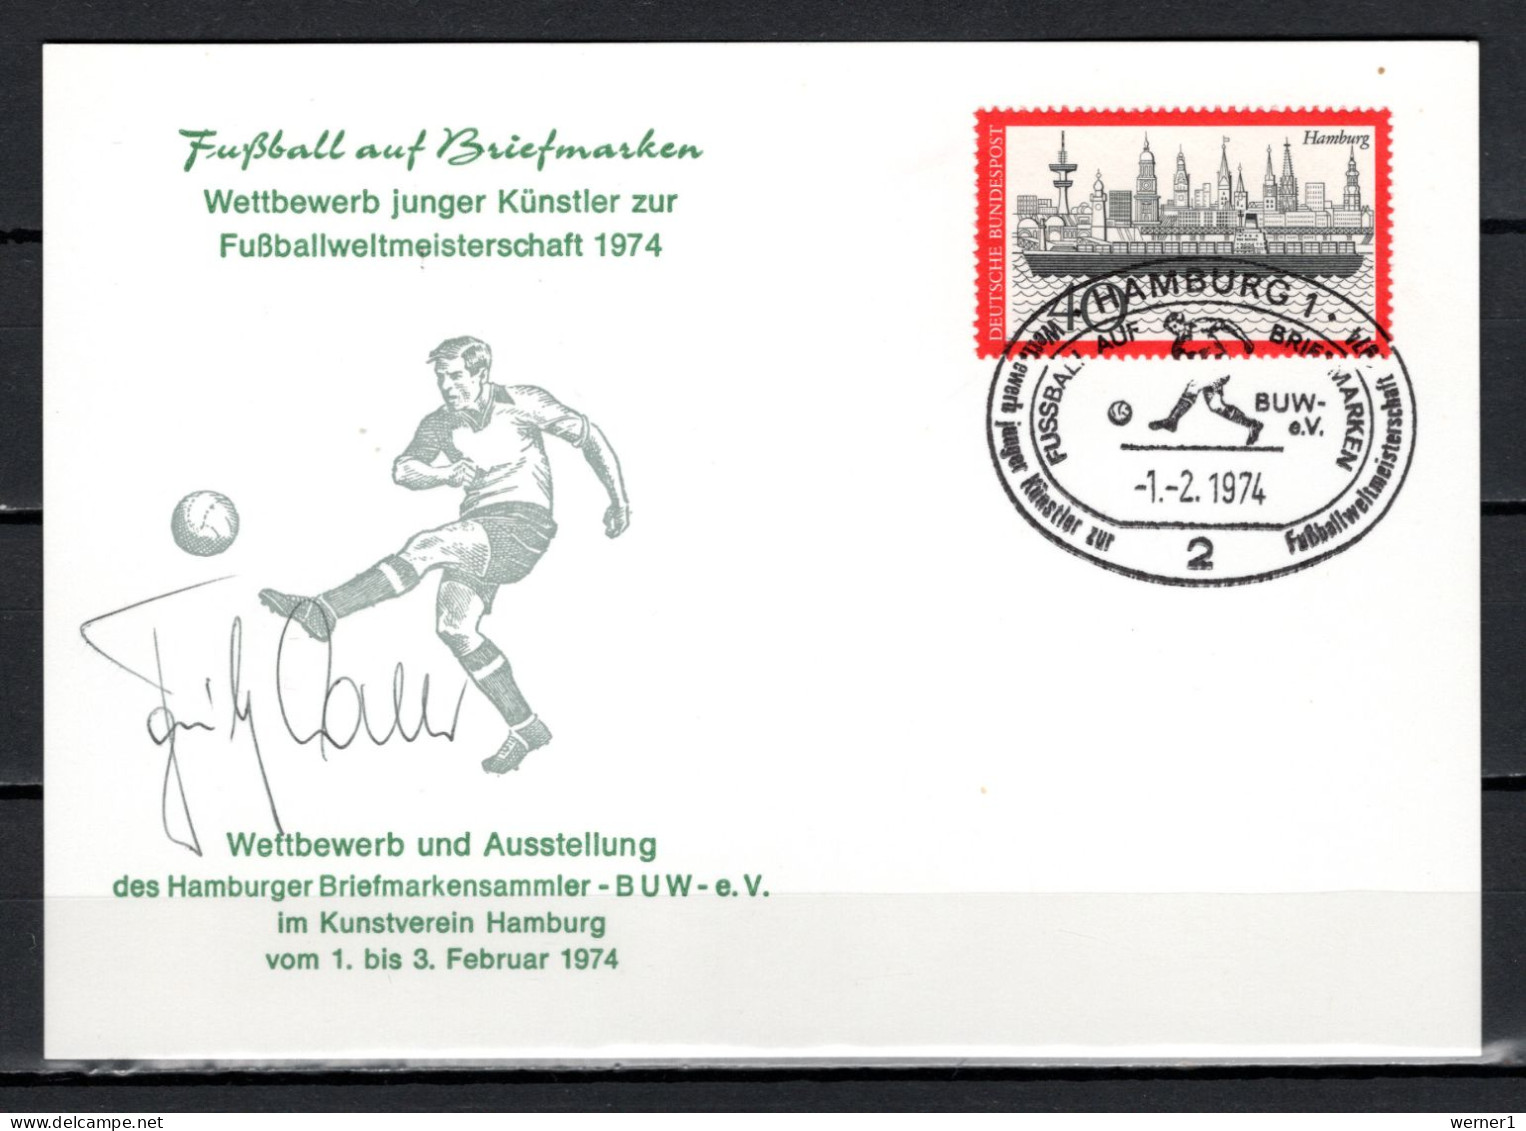 Germany 1974 Football Soccer World Cup Autograph Postcard With Original Signature Of Fritz Walter - 1974 – Allemagne Fédérale